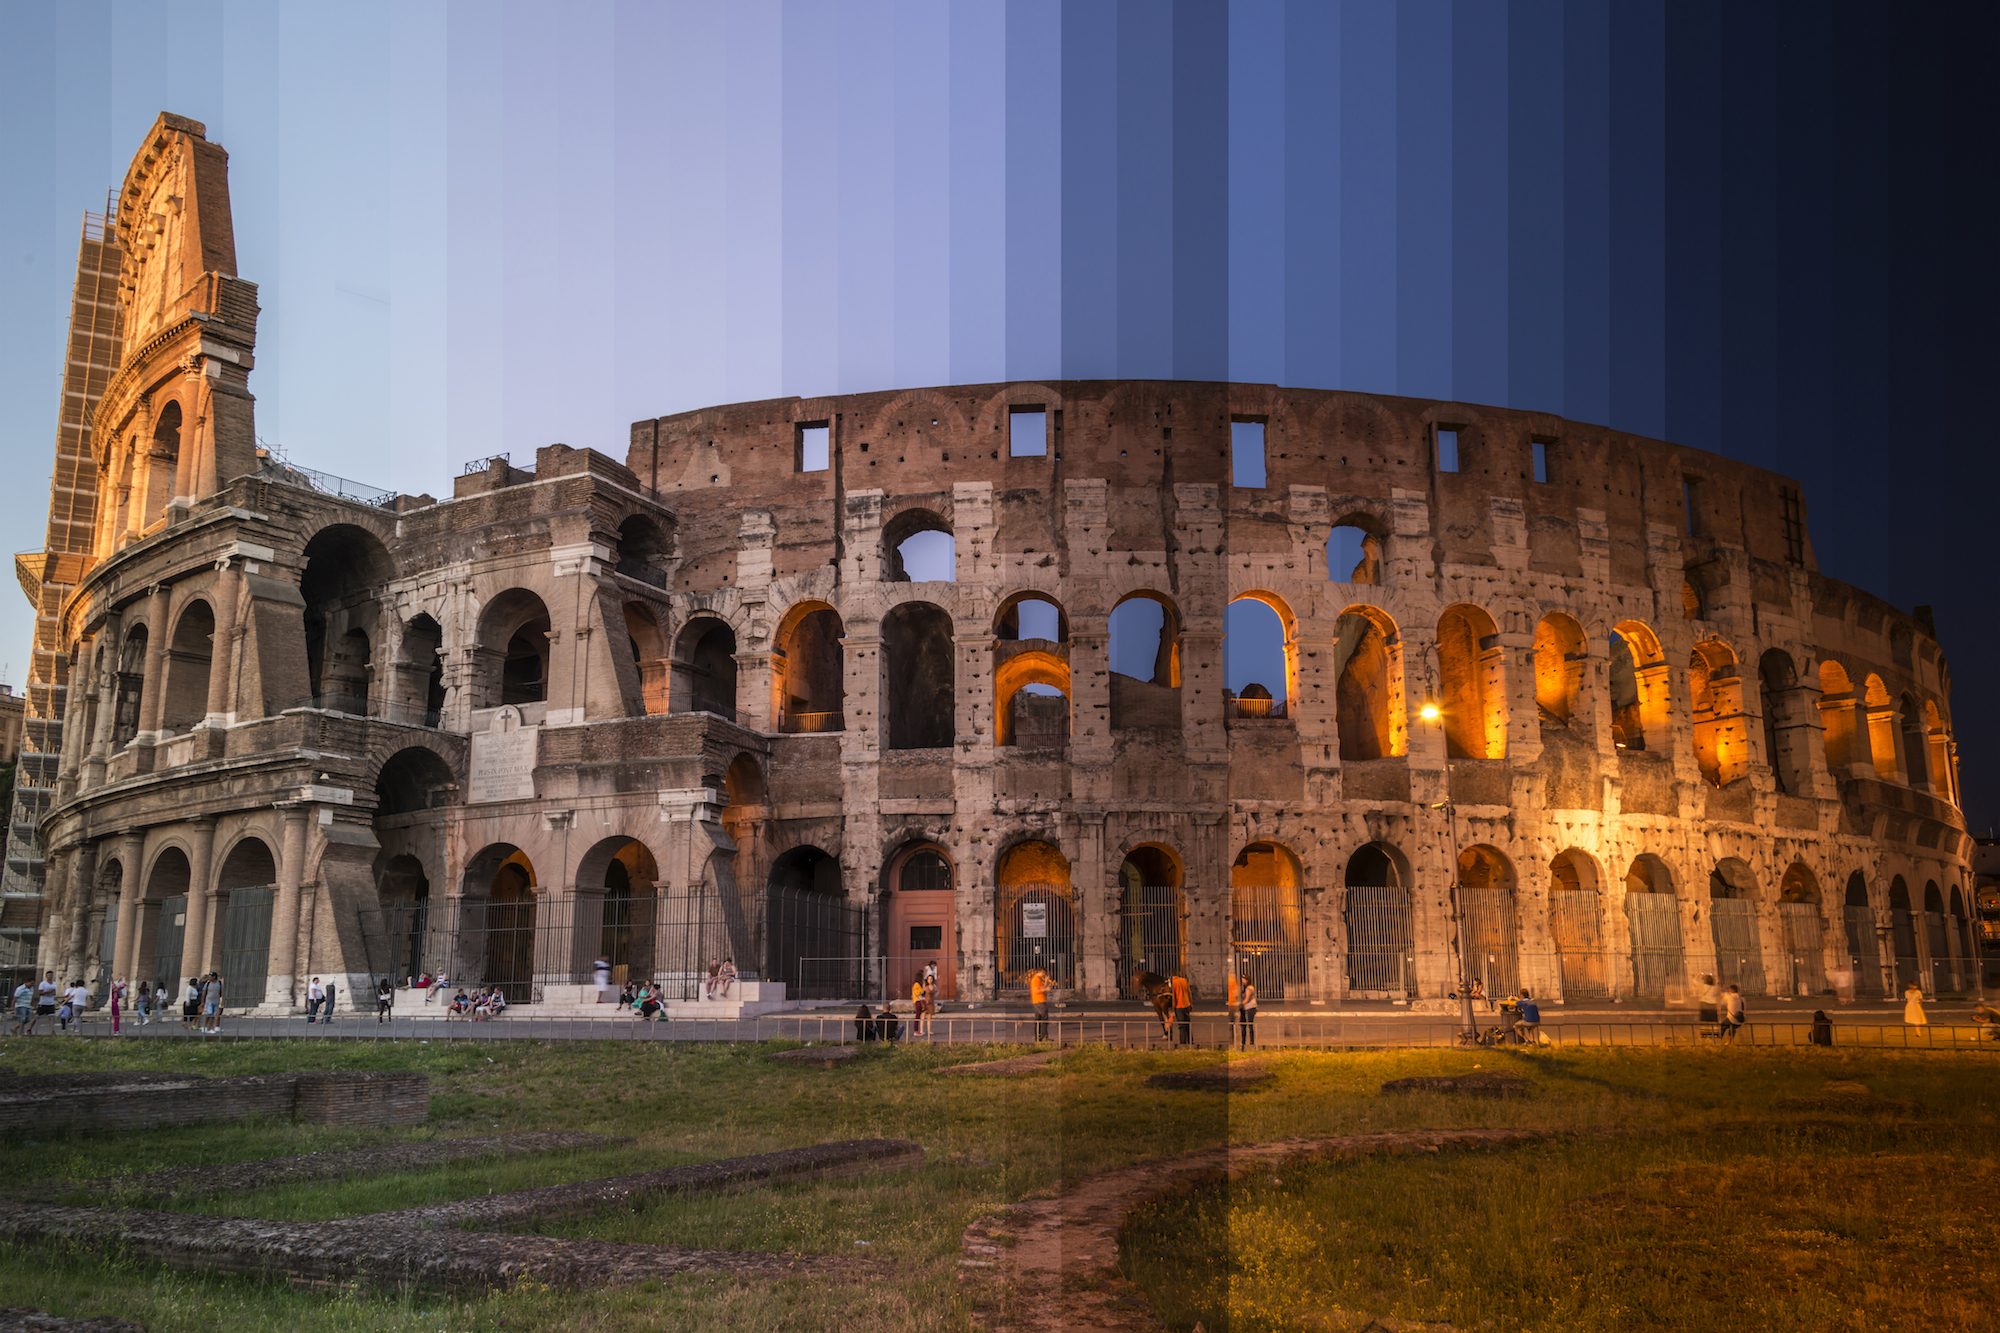 Here’s What Famous Buildings Look Like From Day To Night In One Photo